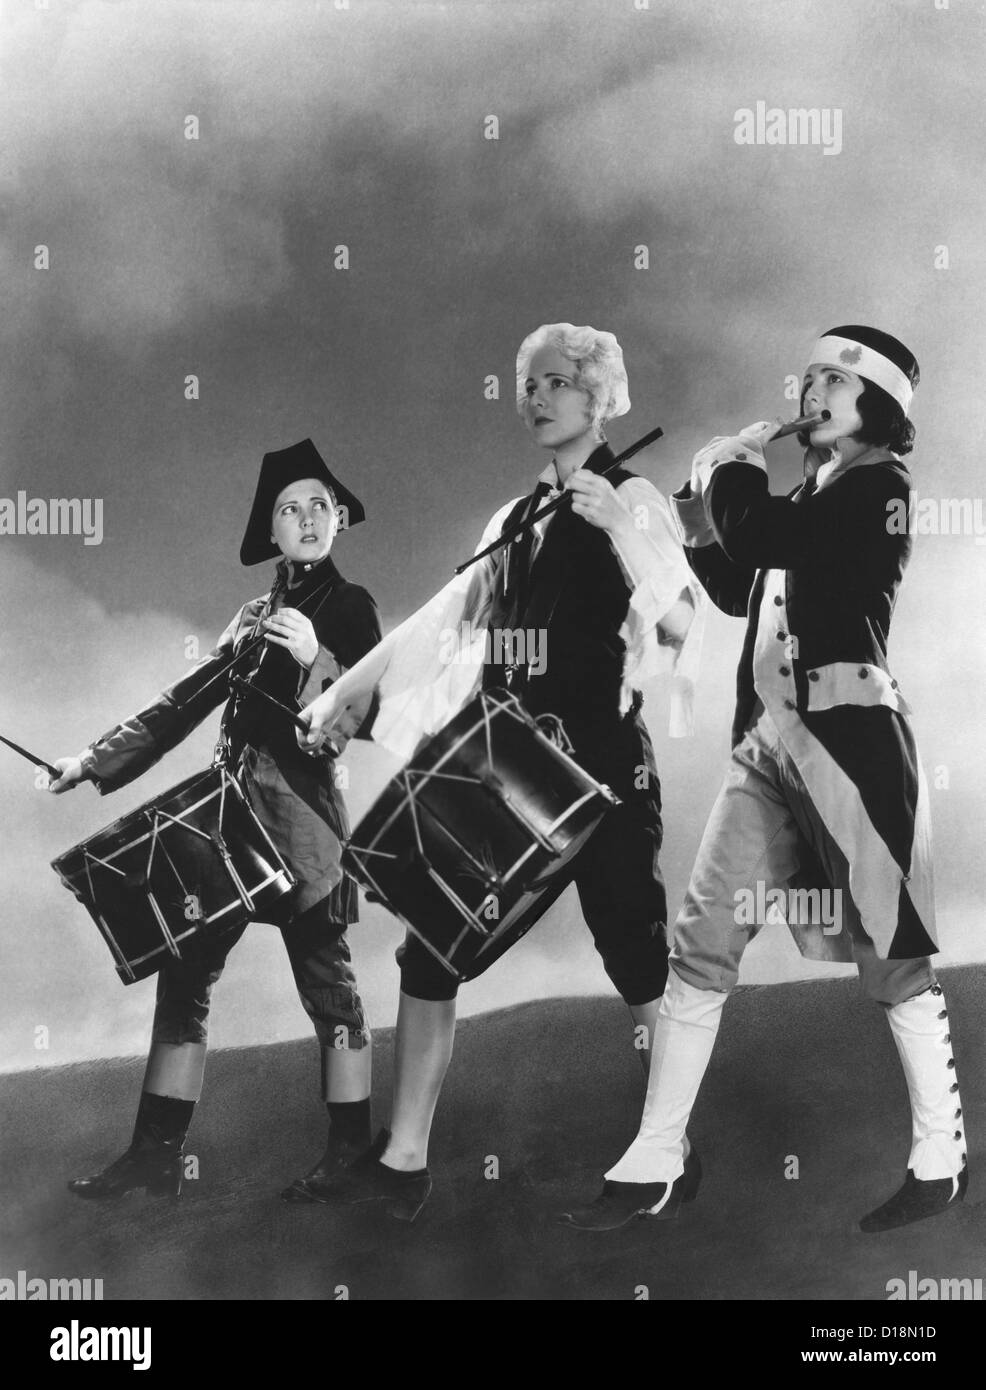 Marching while playing Black and White Stock Photos & Images - Alamy